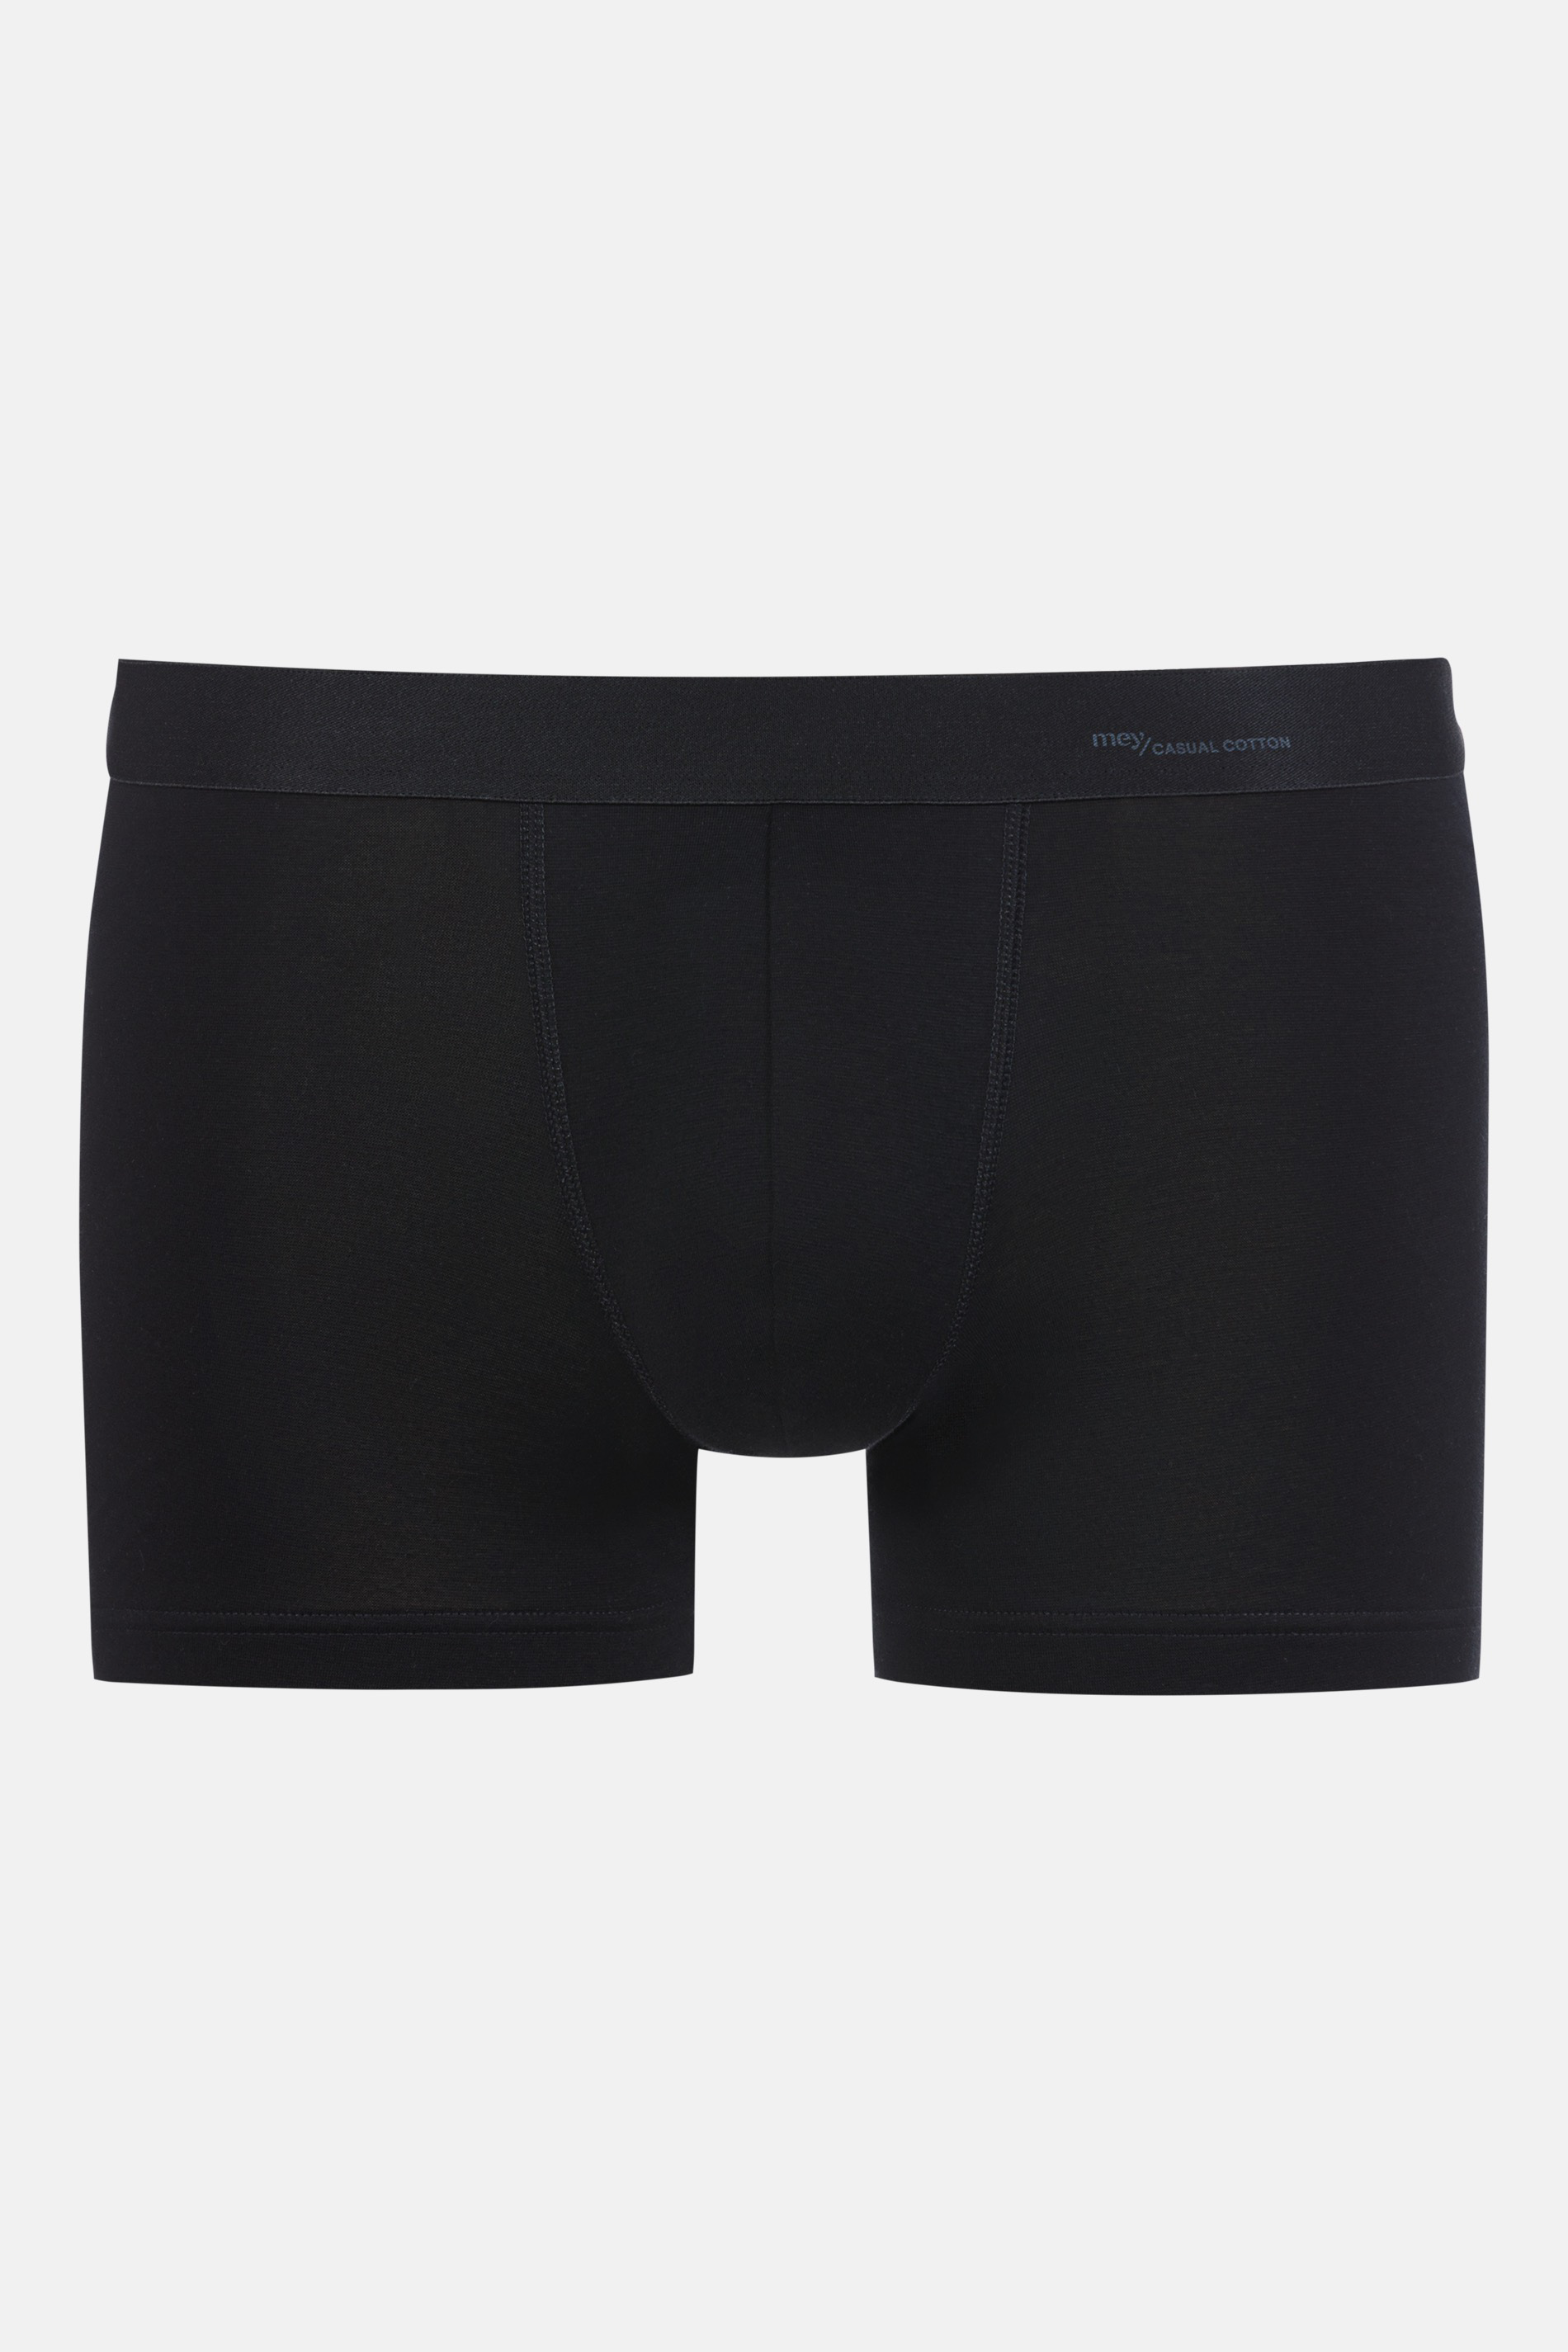 Shorty Serie Casual Cotton Cut Out | mey®